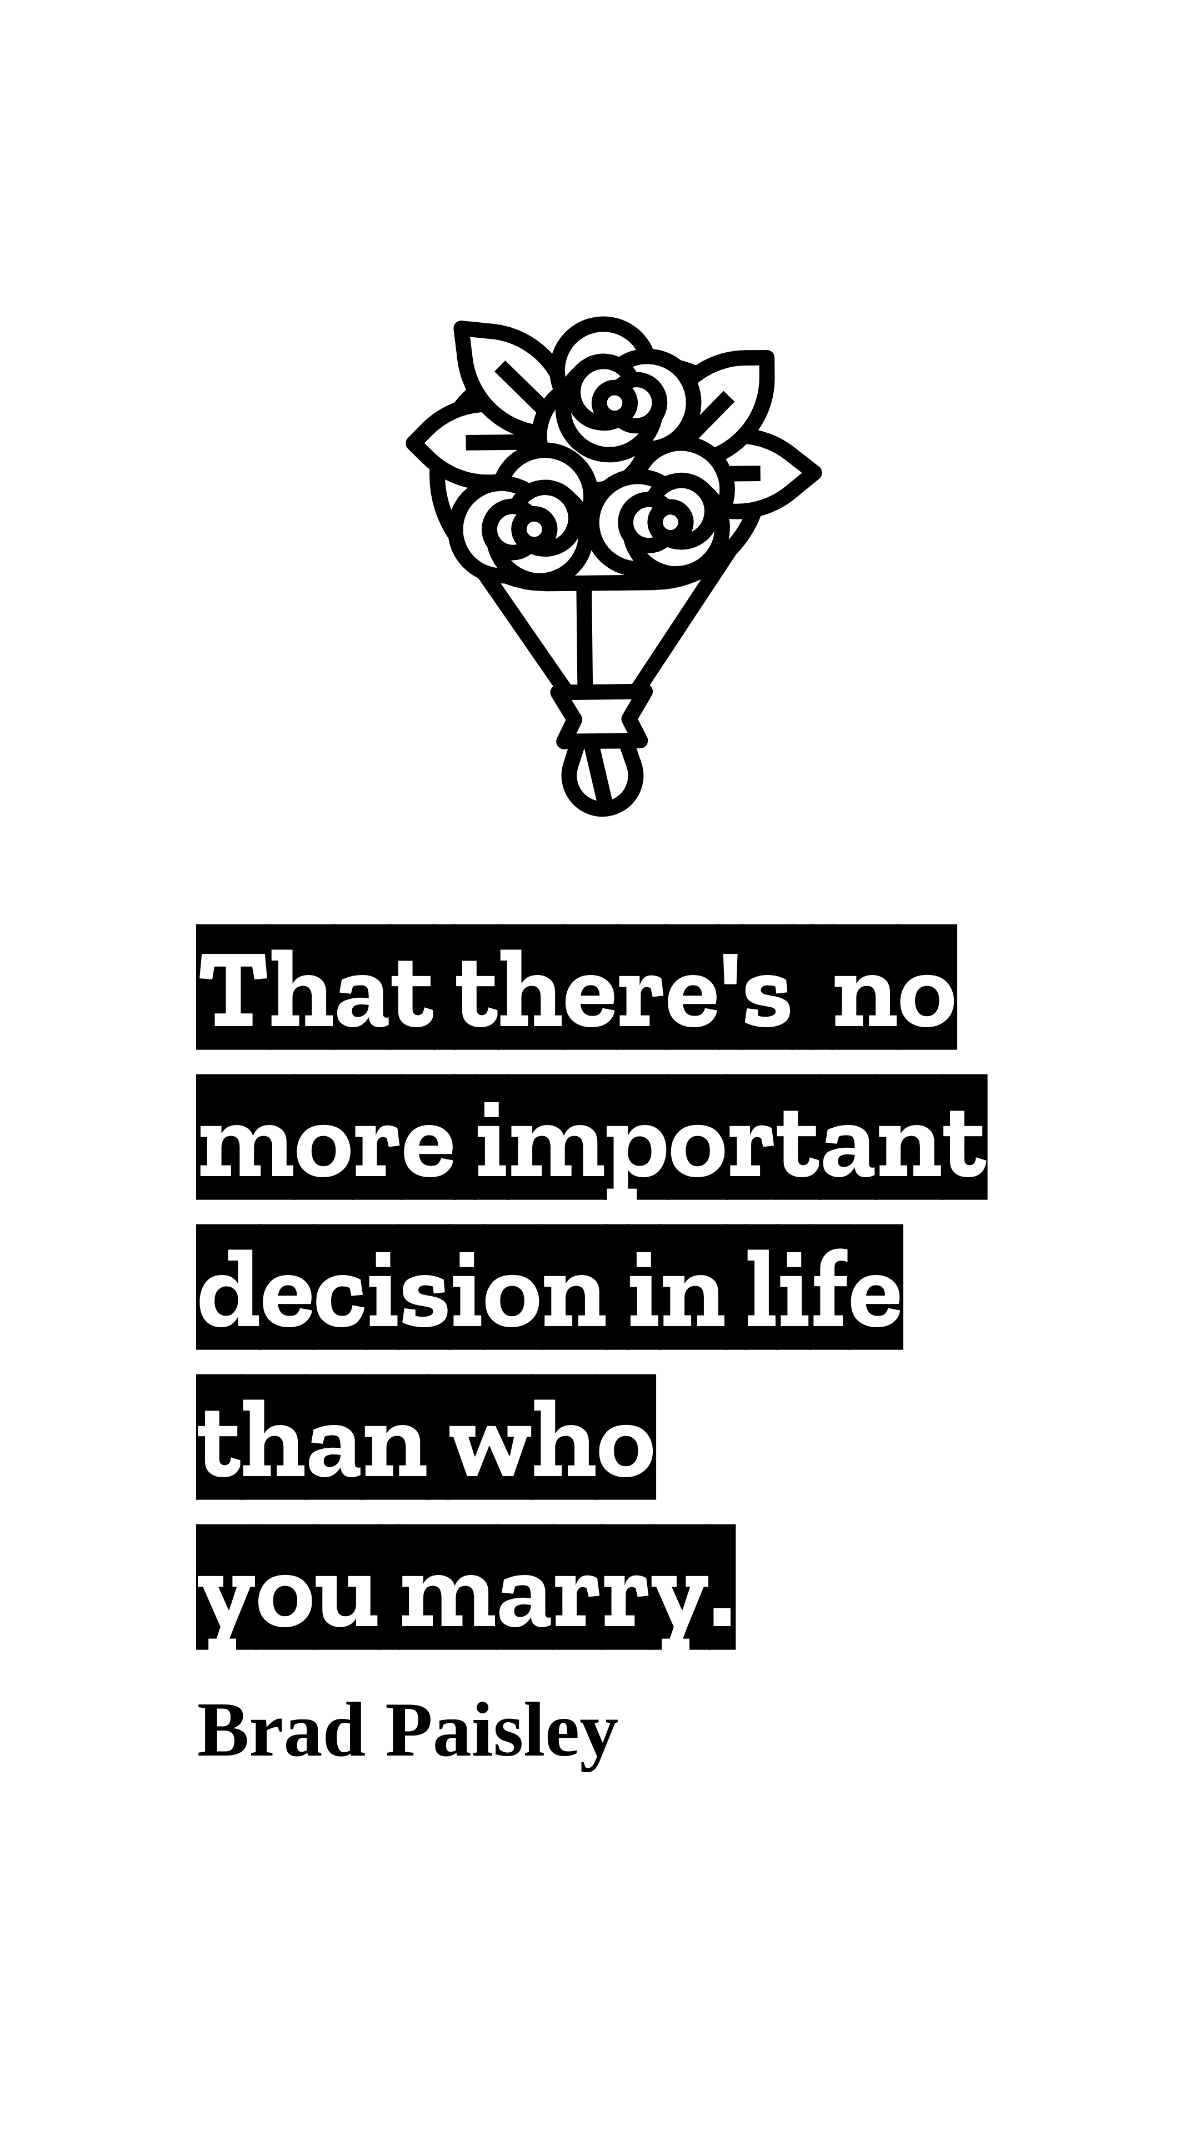 Brad Paisley - That there's no more important decision in life than who you marry. Template